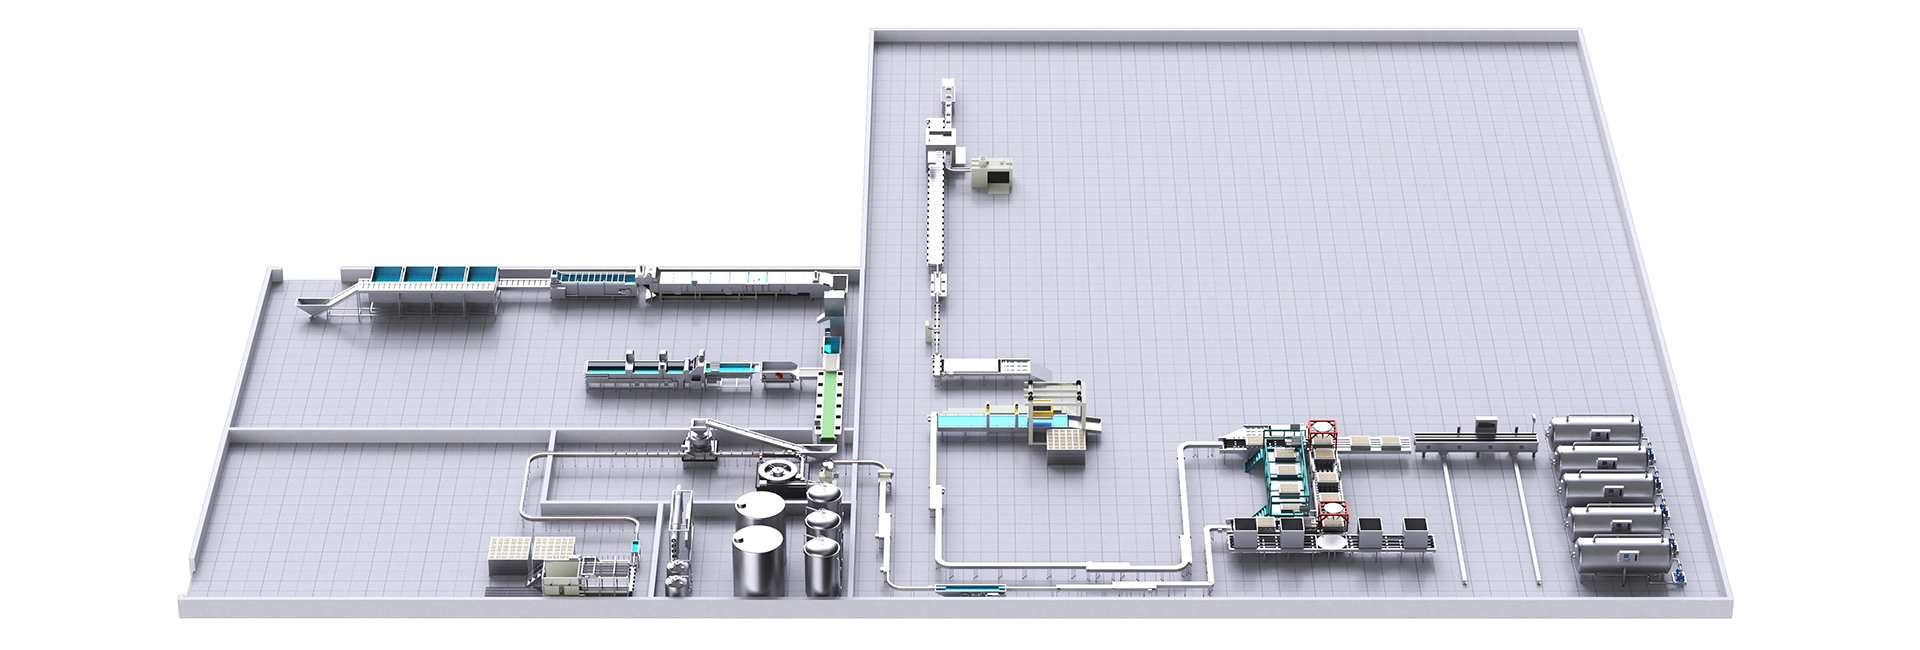 Canned food machinery production line 